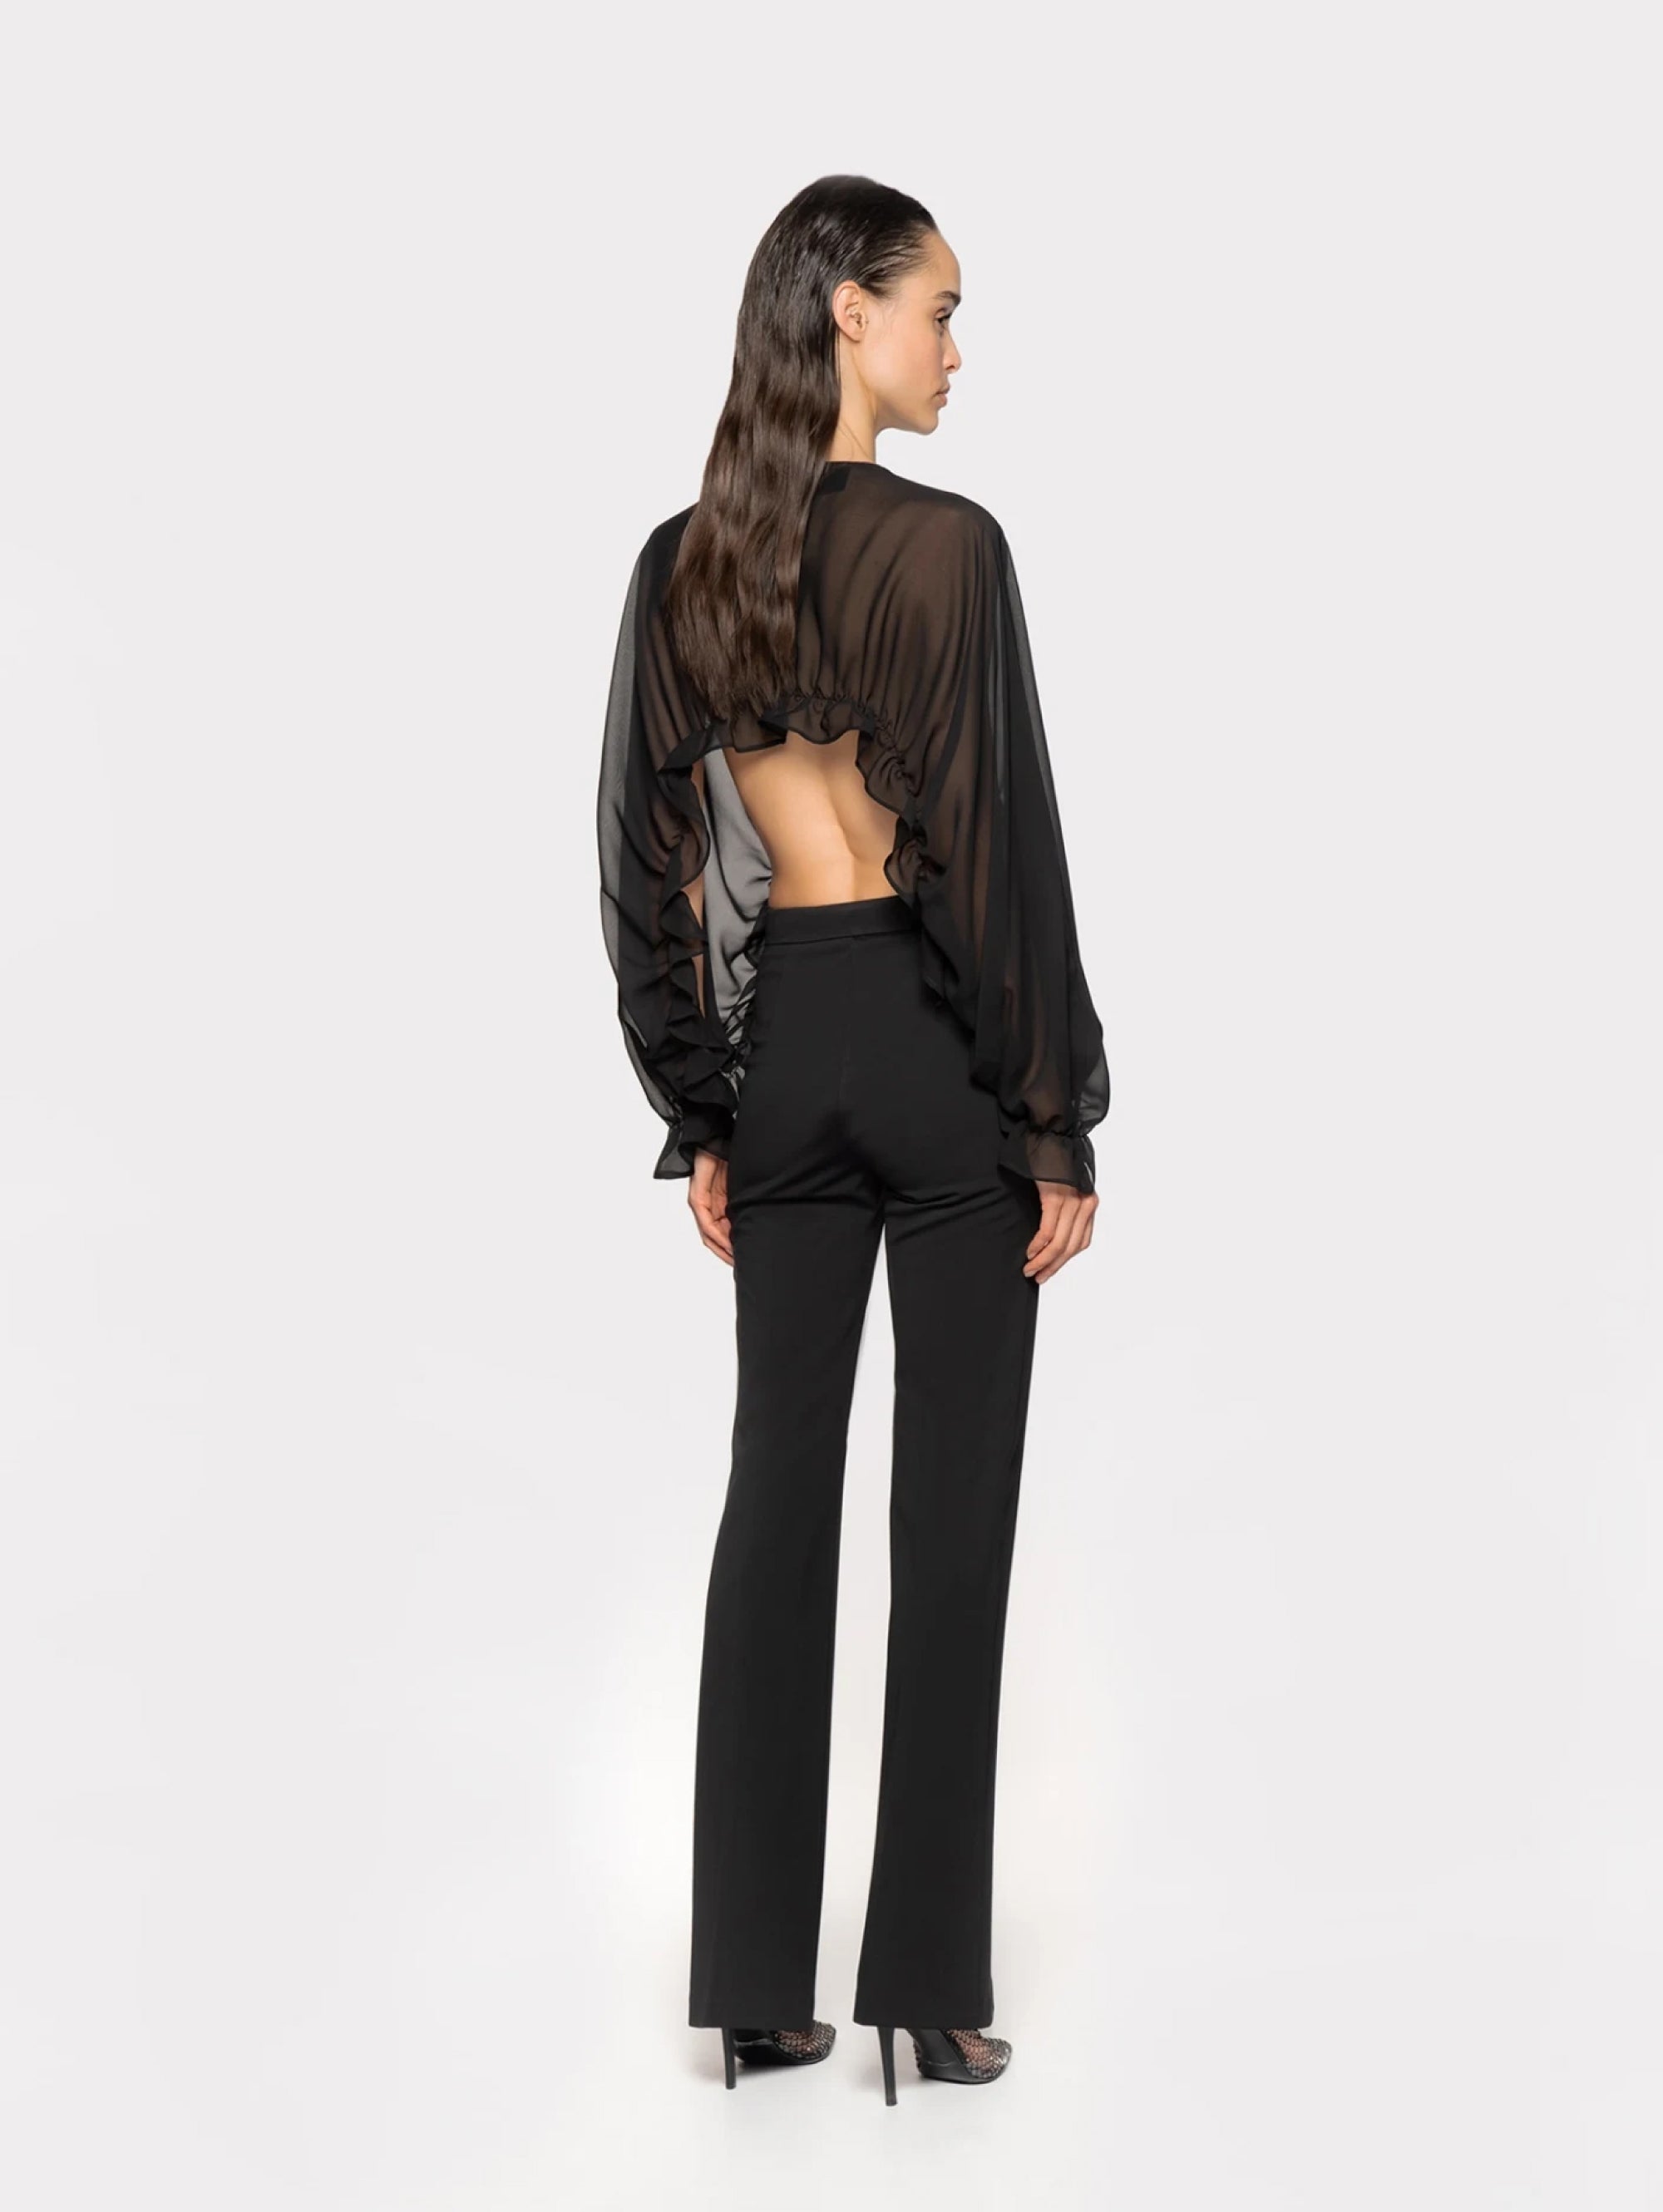 Flare Pants in Black Technical Fabric